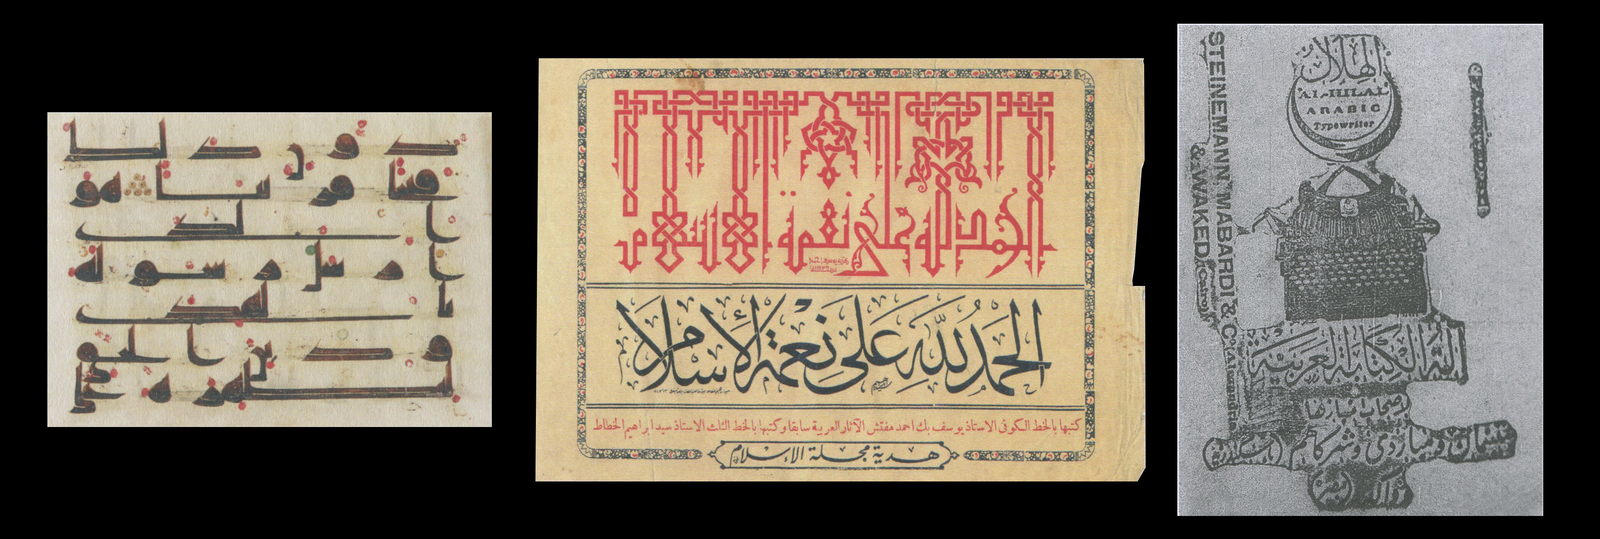 (From left to right): folio from the Koran, early Kufic style, Abbasid dynastiy; newspaper gift insert, calligraphy by Yusuf Ahmad and Sayed Ibrahim, year unknown; advertisement for Waked’s al-Hilal Arabic typewriter, early 20th century (source: AUC Press)